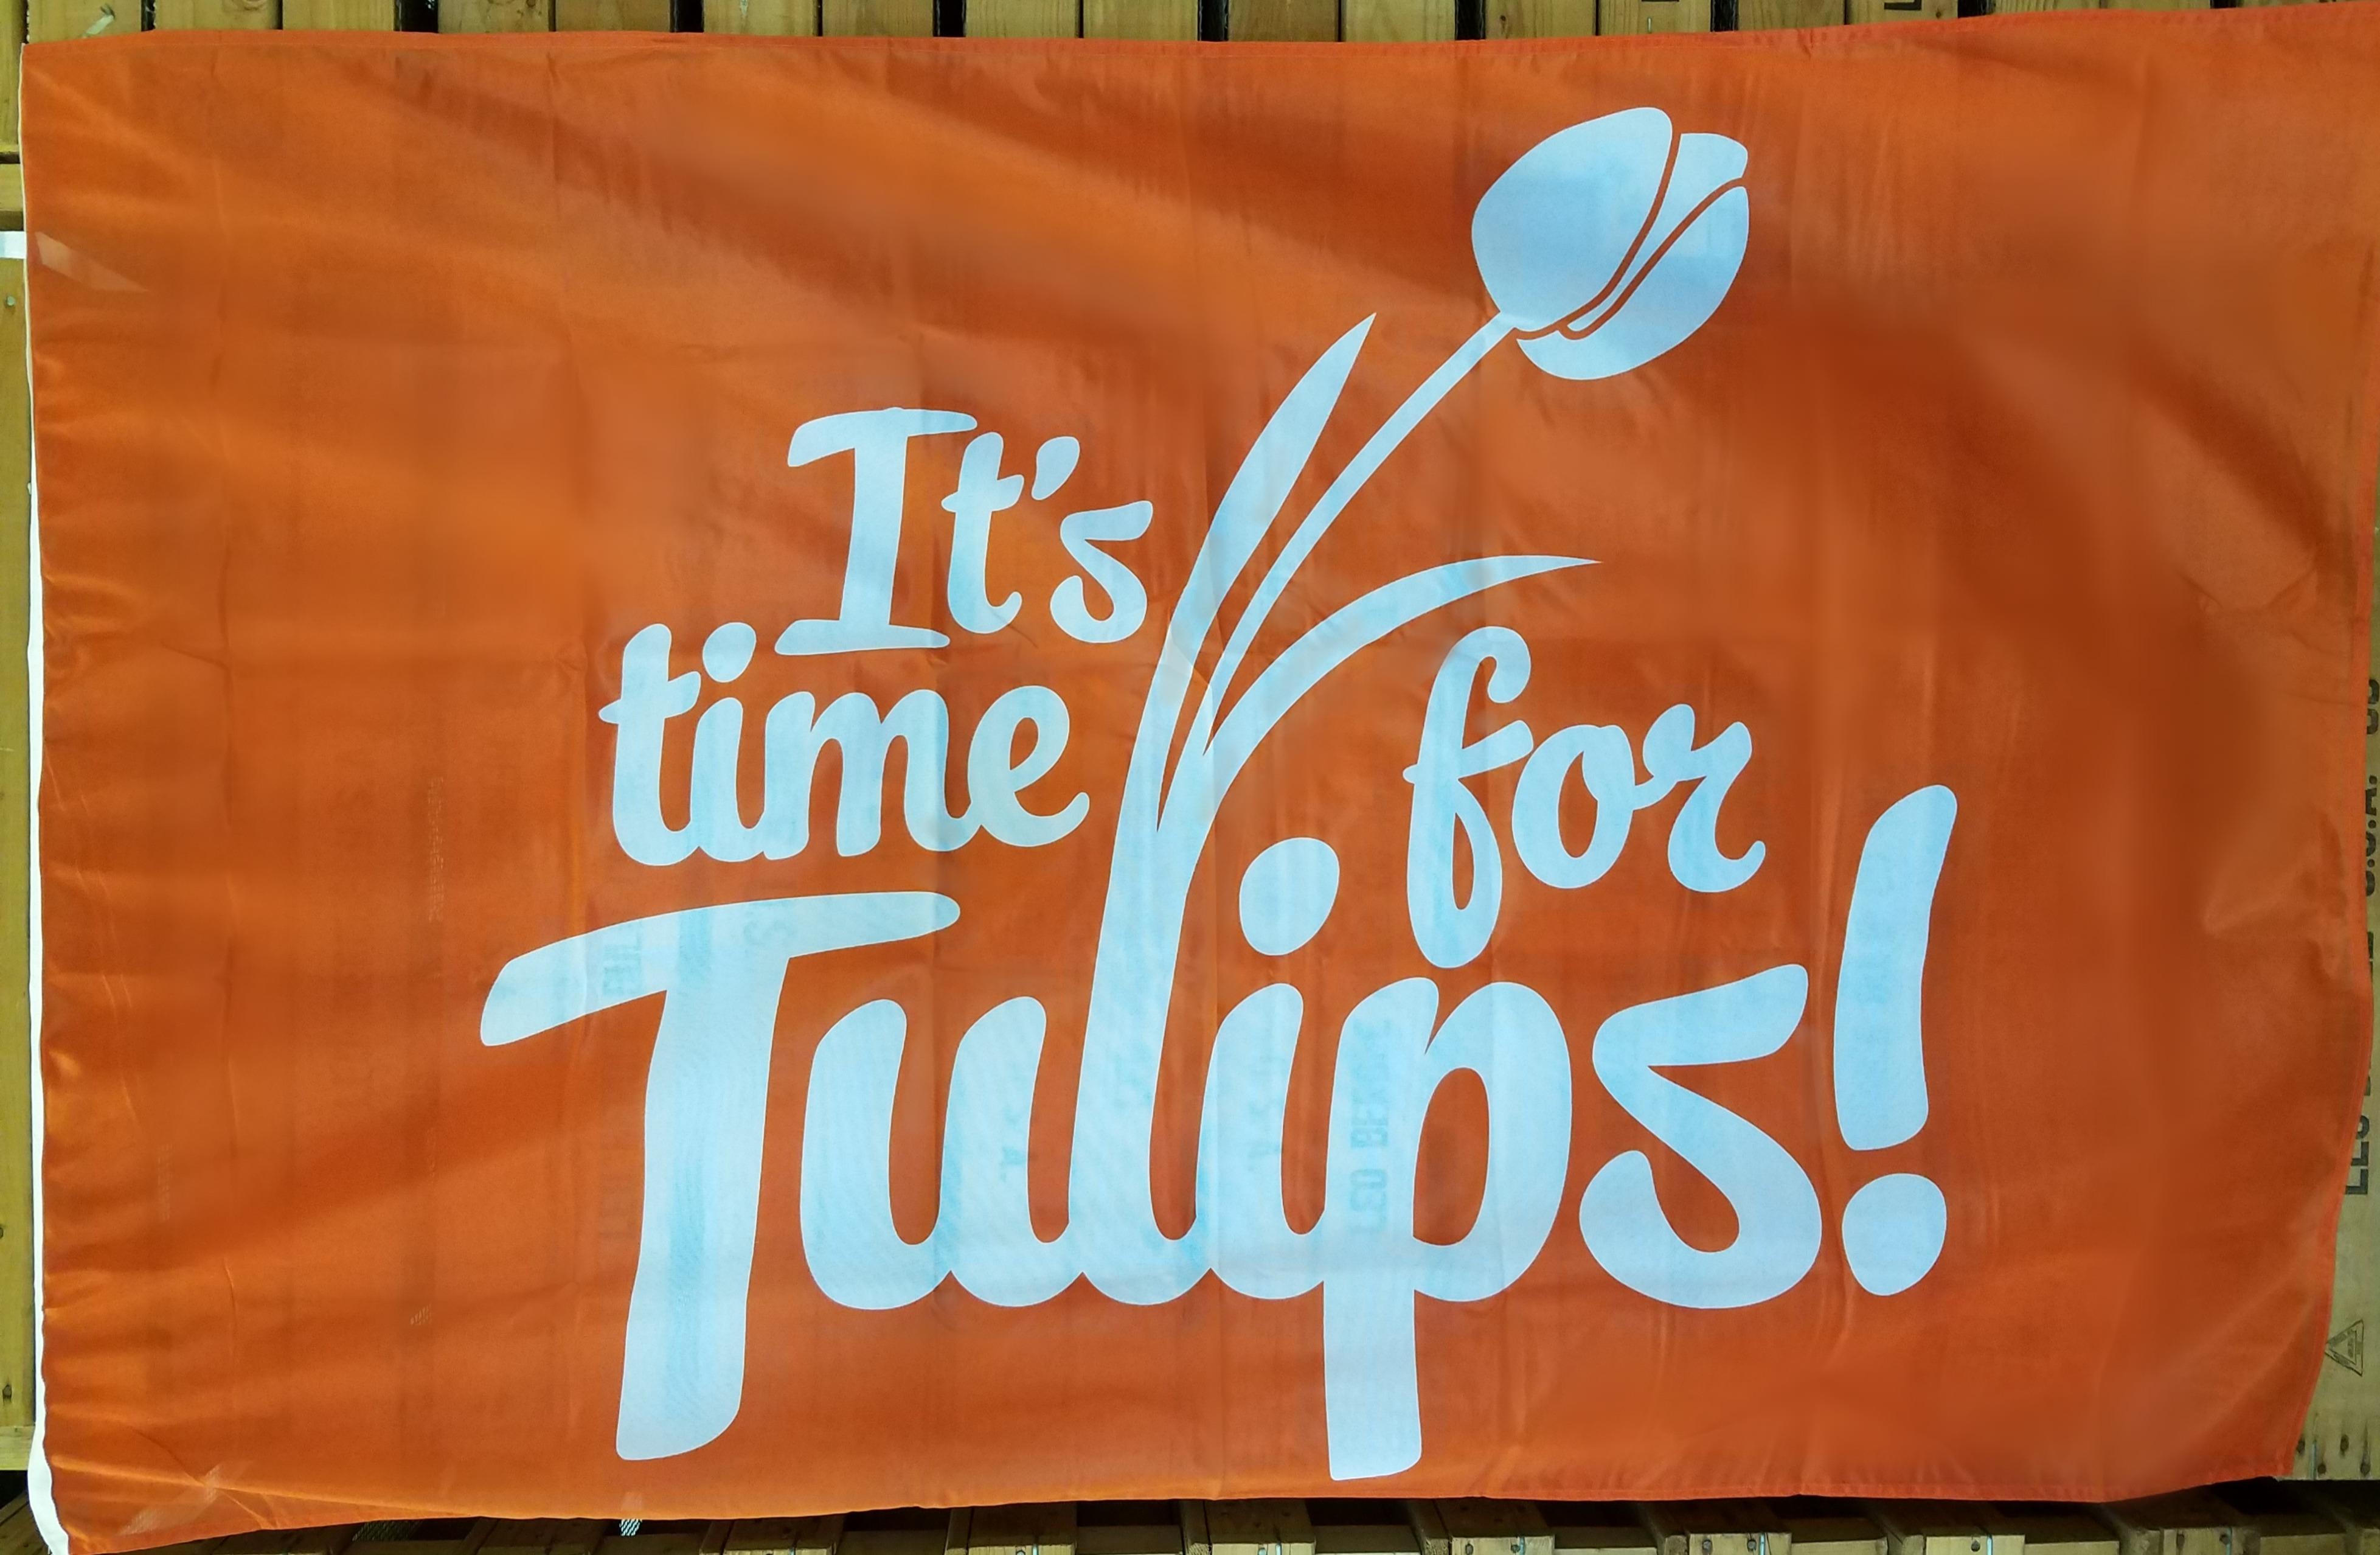 Promotional Tulip Flag from Leo Berbee Bulb Company